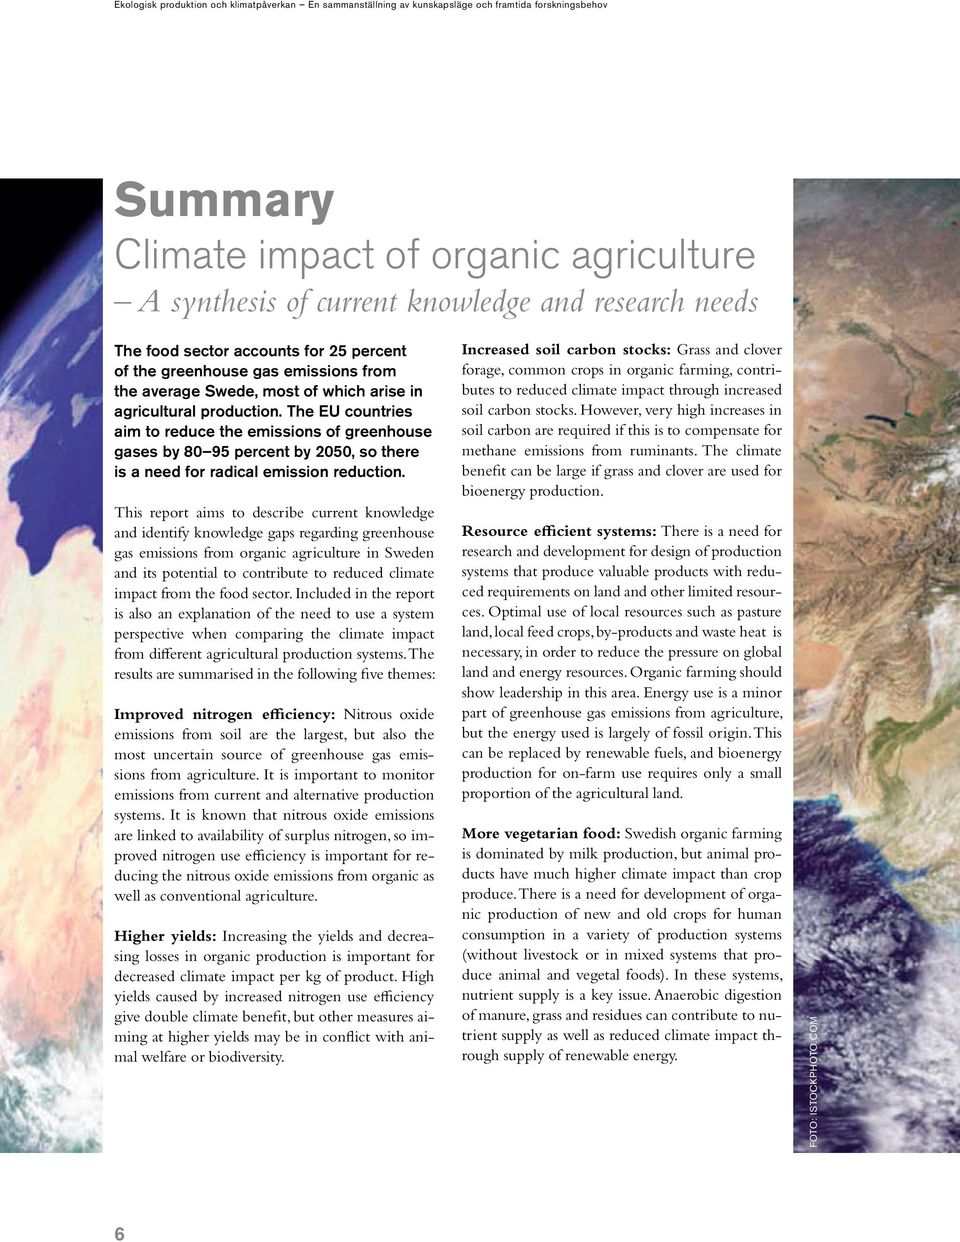 This report aims to describe current knowledge and identify knowledge gaps regarding greenhouse gas emissions from organic agriculture in Sweden and its potential to contribute to reduced climate